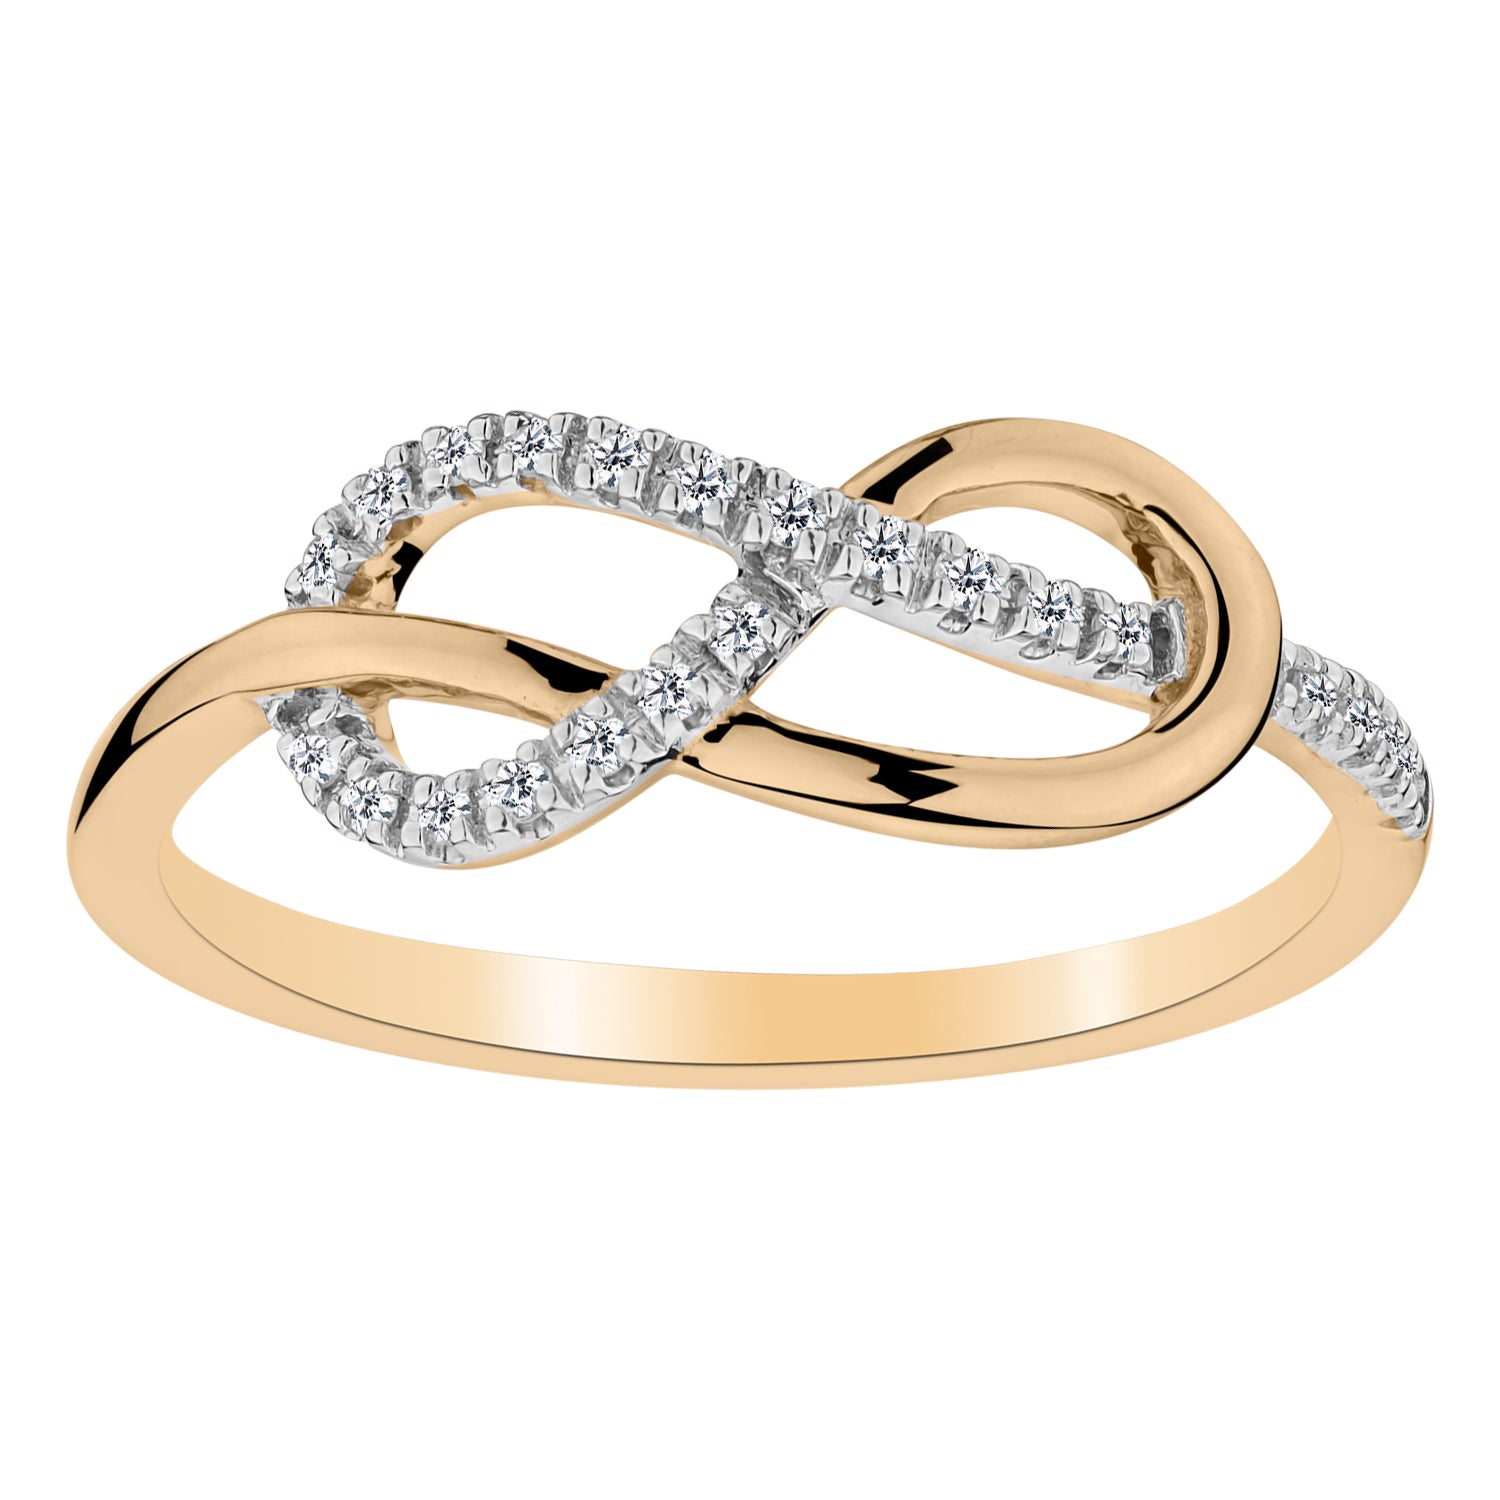 .10 Carat of Diamonds "Infinity" Ring, 10kt Yellow Gold...................NOW